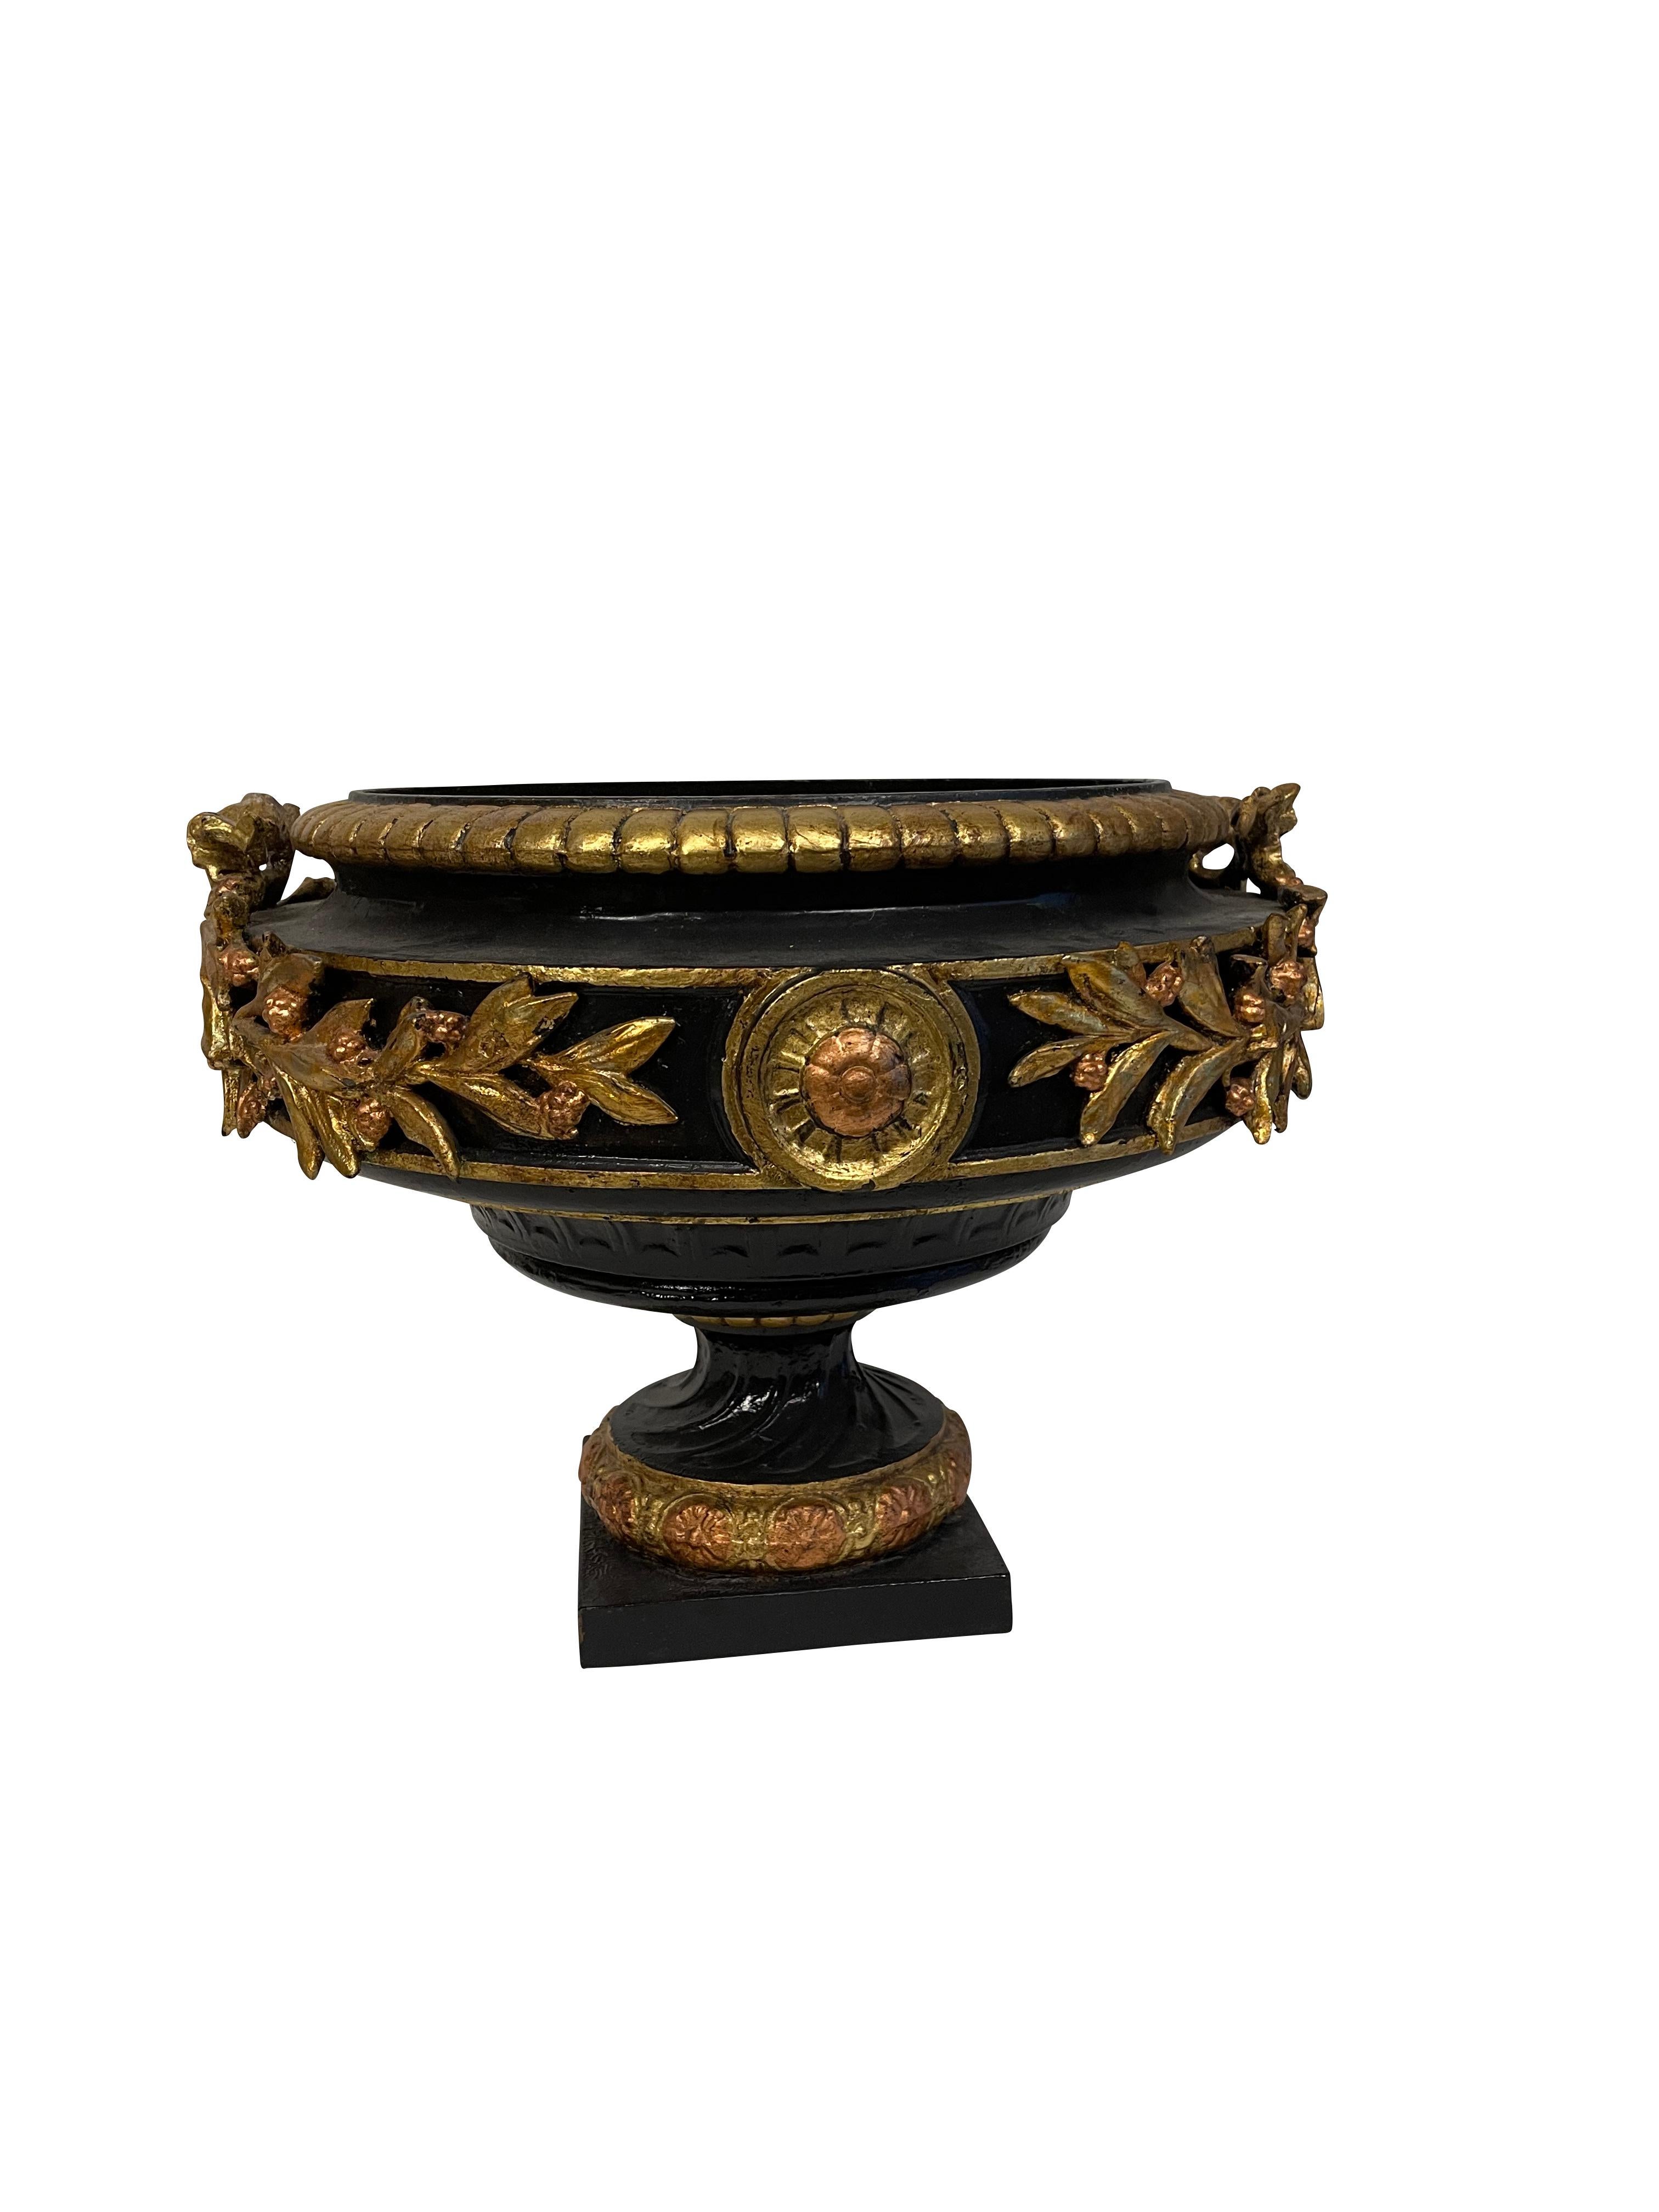 Black and Gilt Cast Iron Urns/ Planters Neoclassical Style  In Good Condition For Sale In Essex, MA